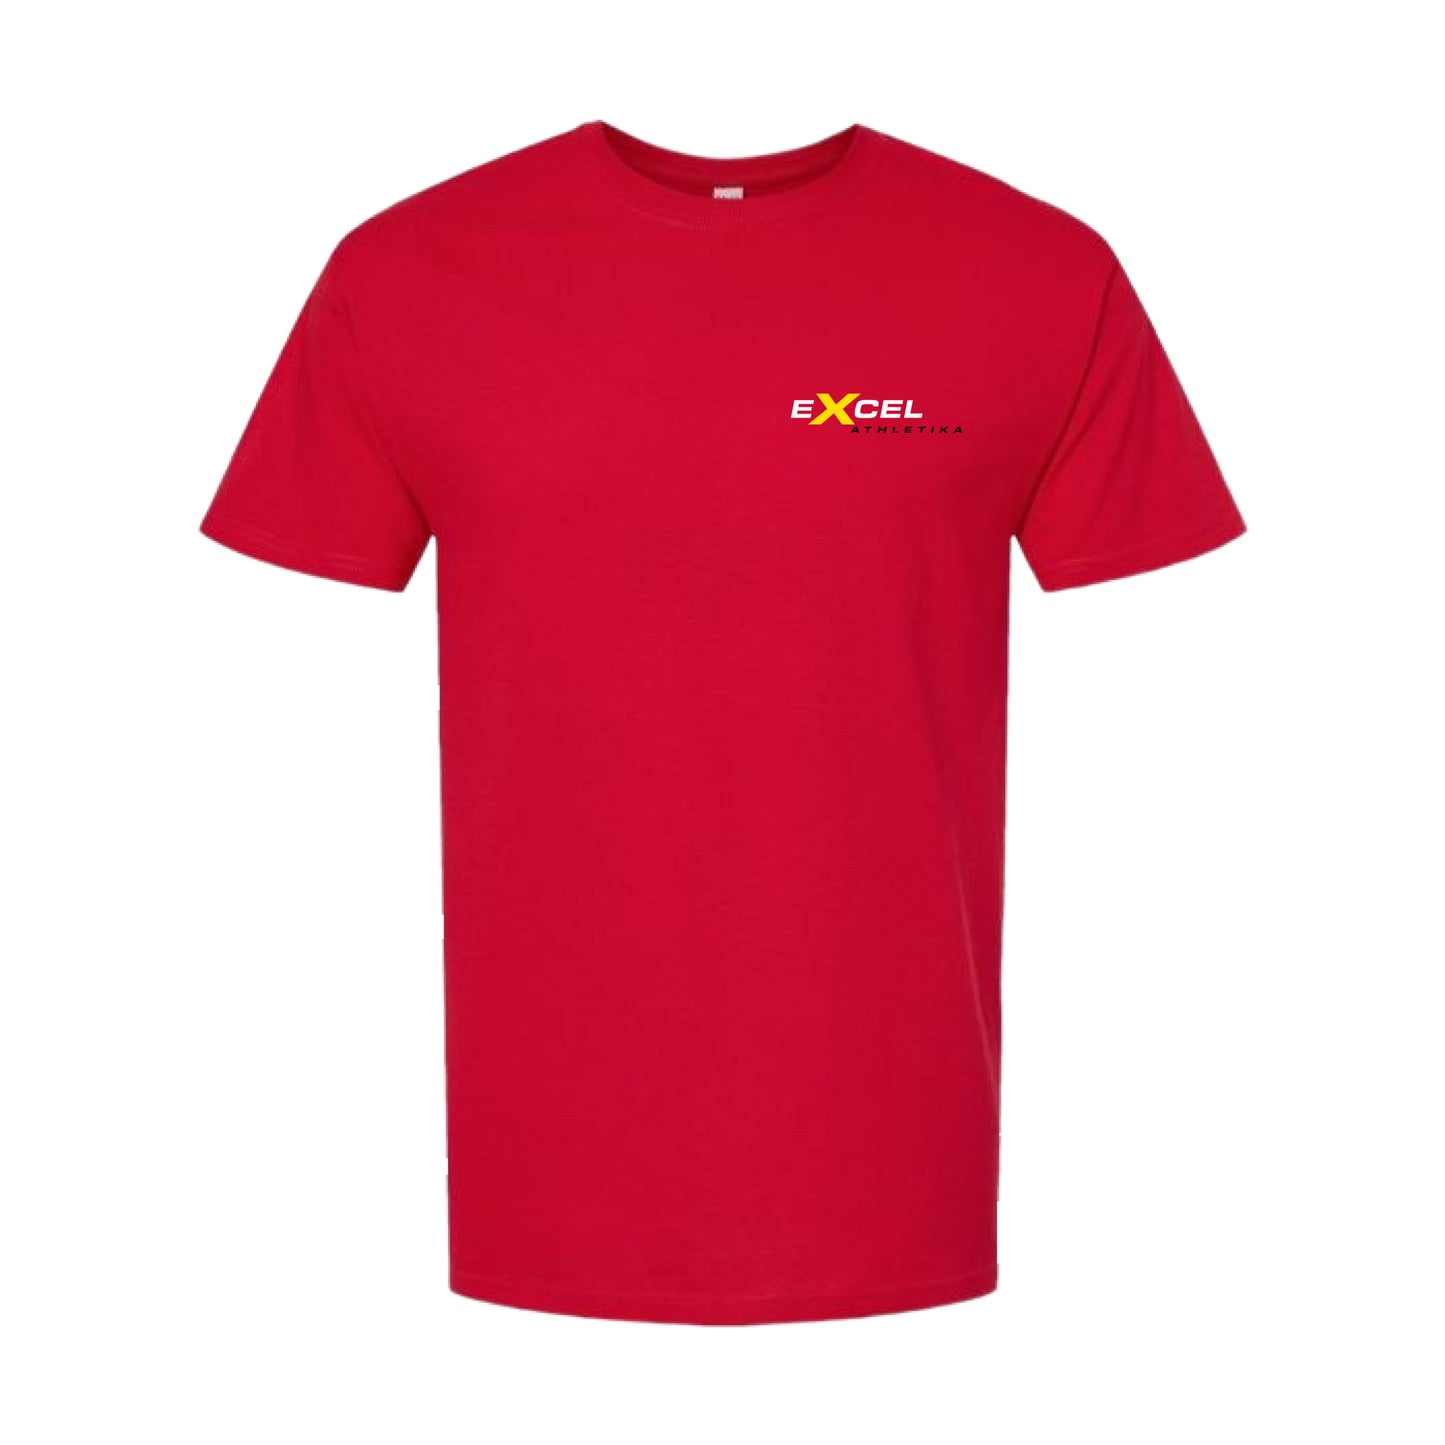 EX24 - Gold Touch Tee - Red - Small Logo